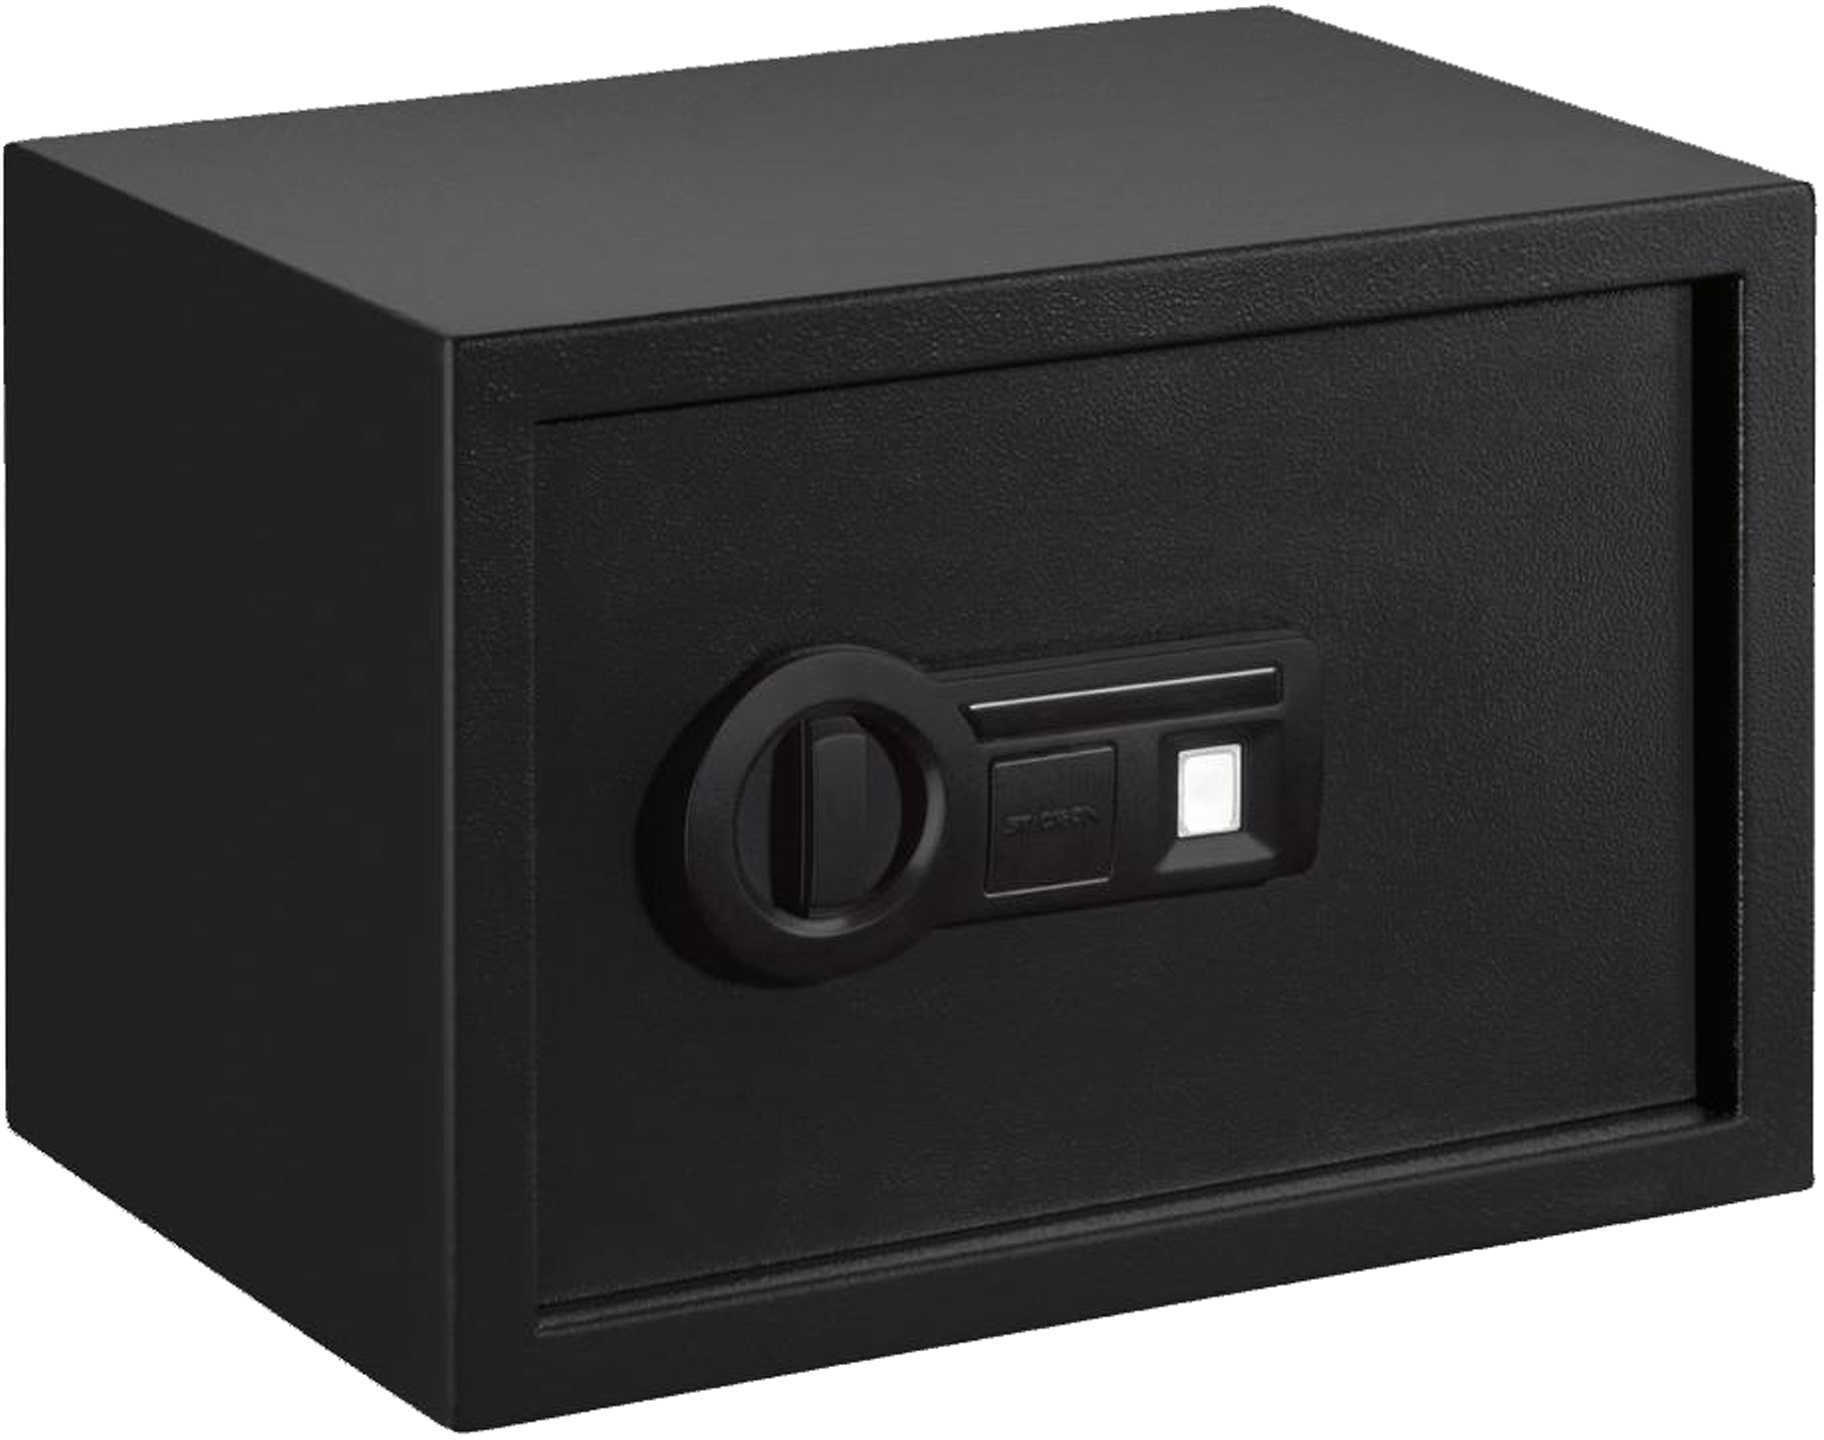 Stack-On Personal Safe Biometric Lock with Shelf Black Md: PS-15-10-B